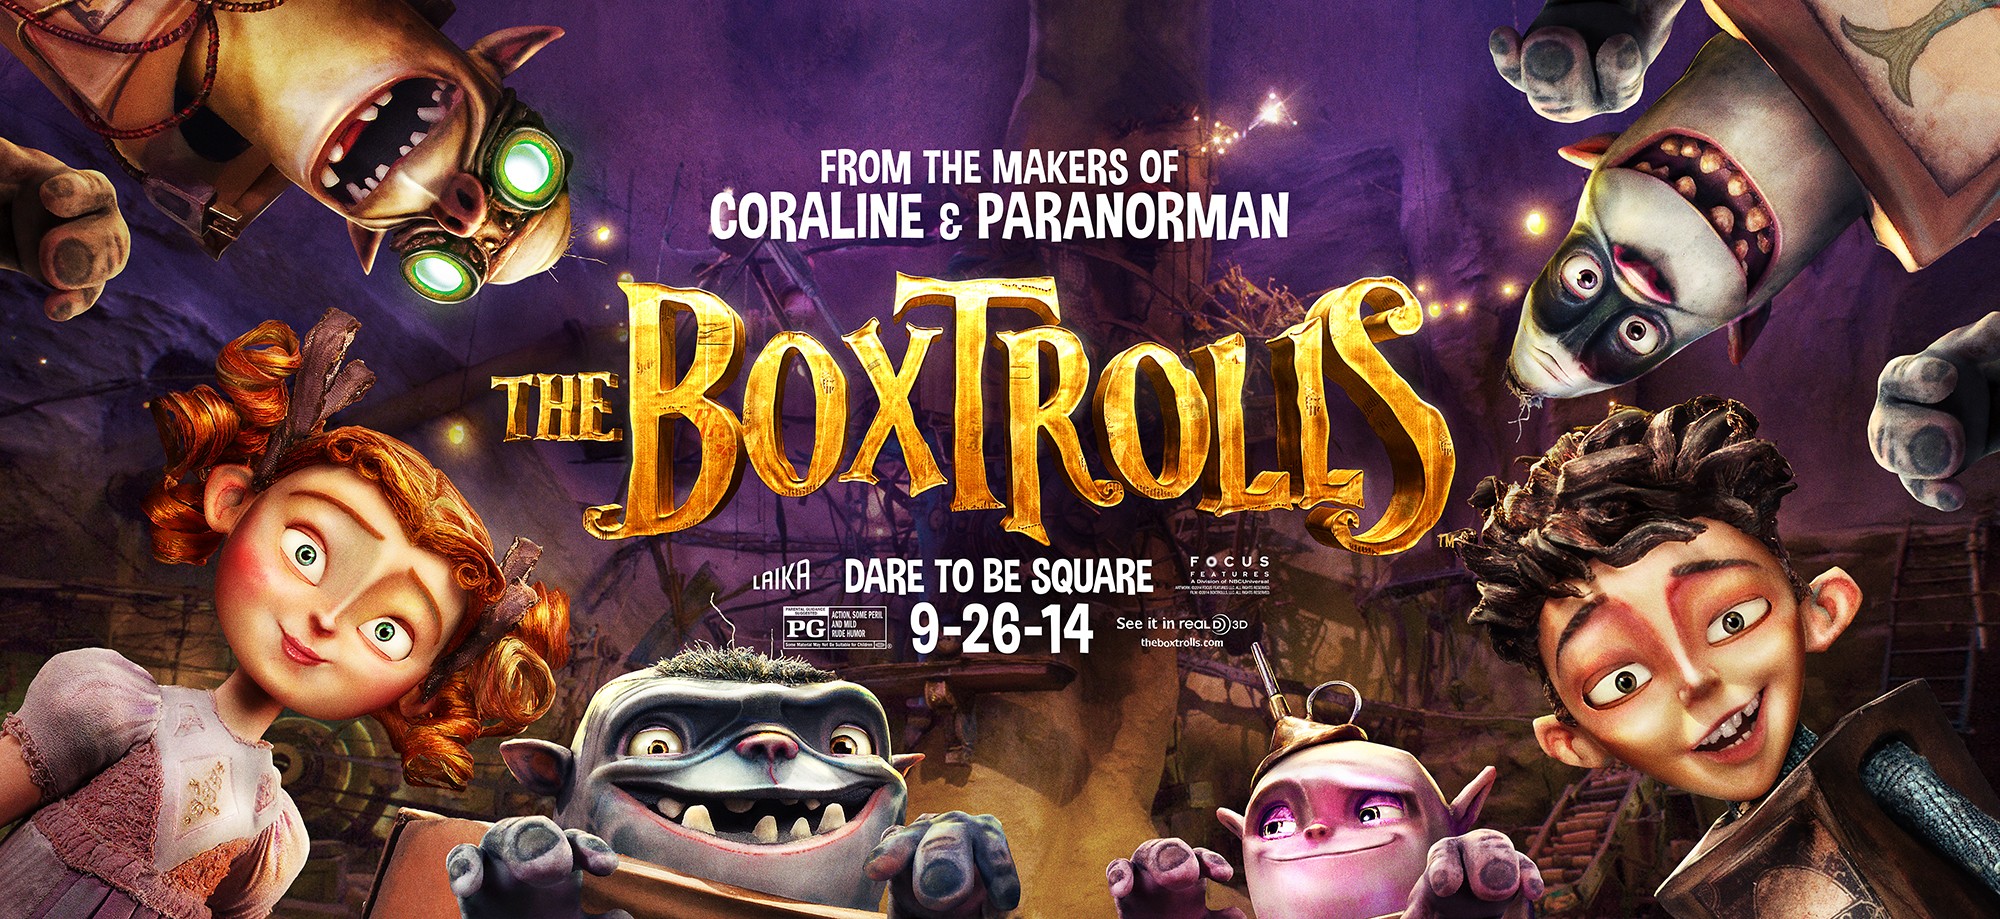 Mega Sized Movie Poster Image for The Boxtrolls (#15 of 16)